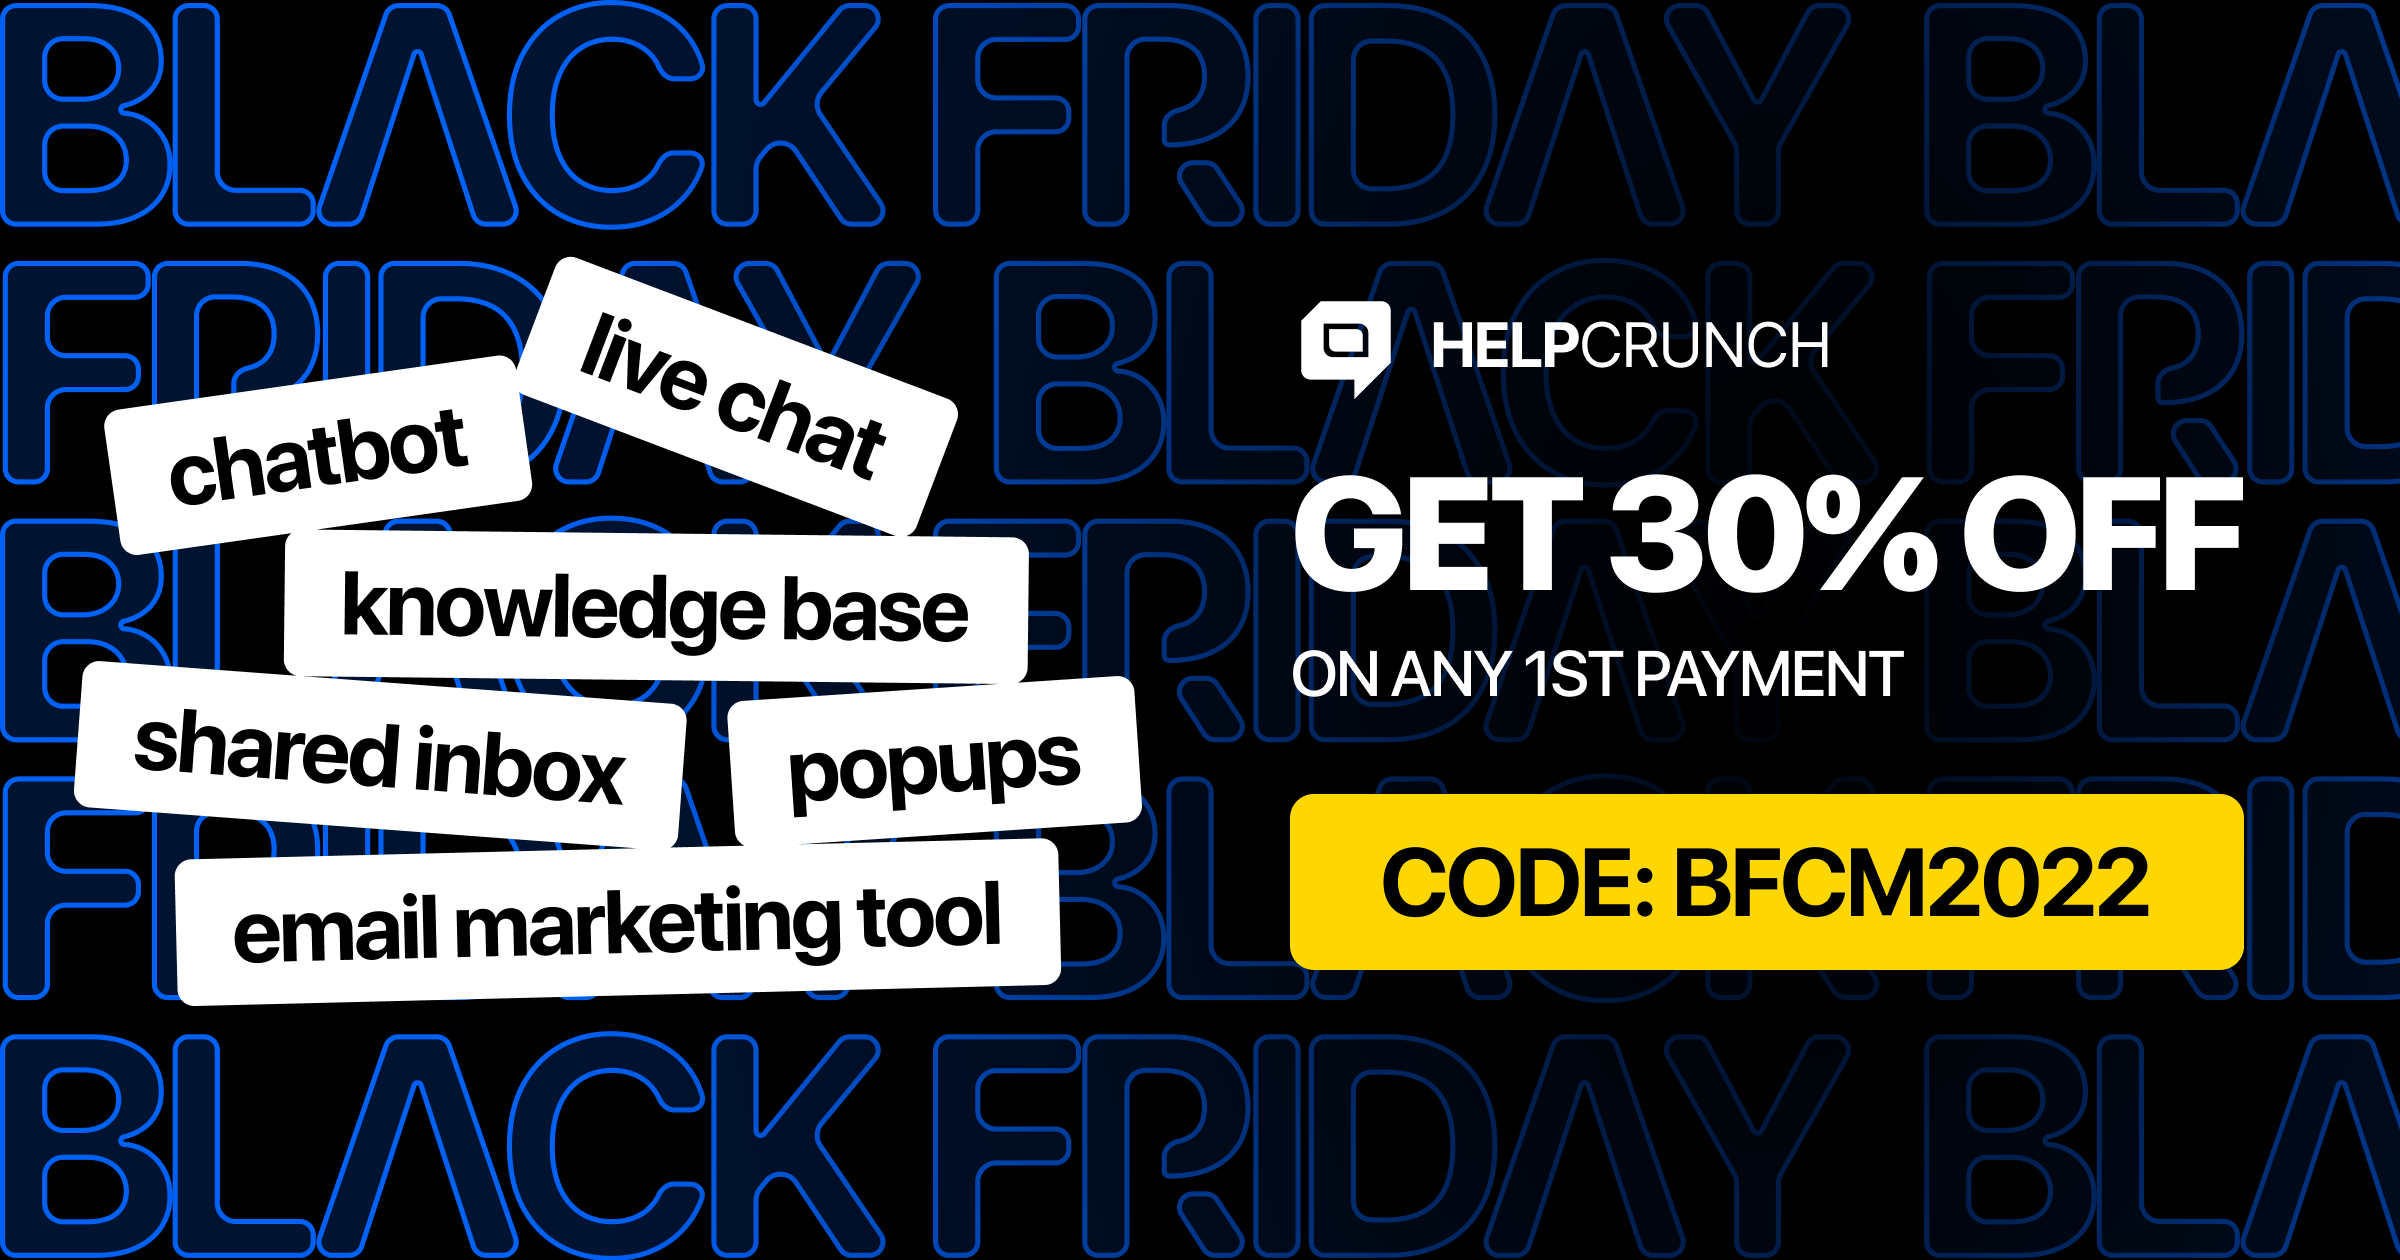 HelpCrunch Black Friday and Cybermonday deal